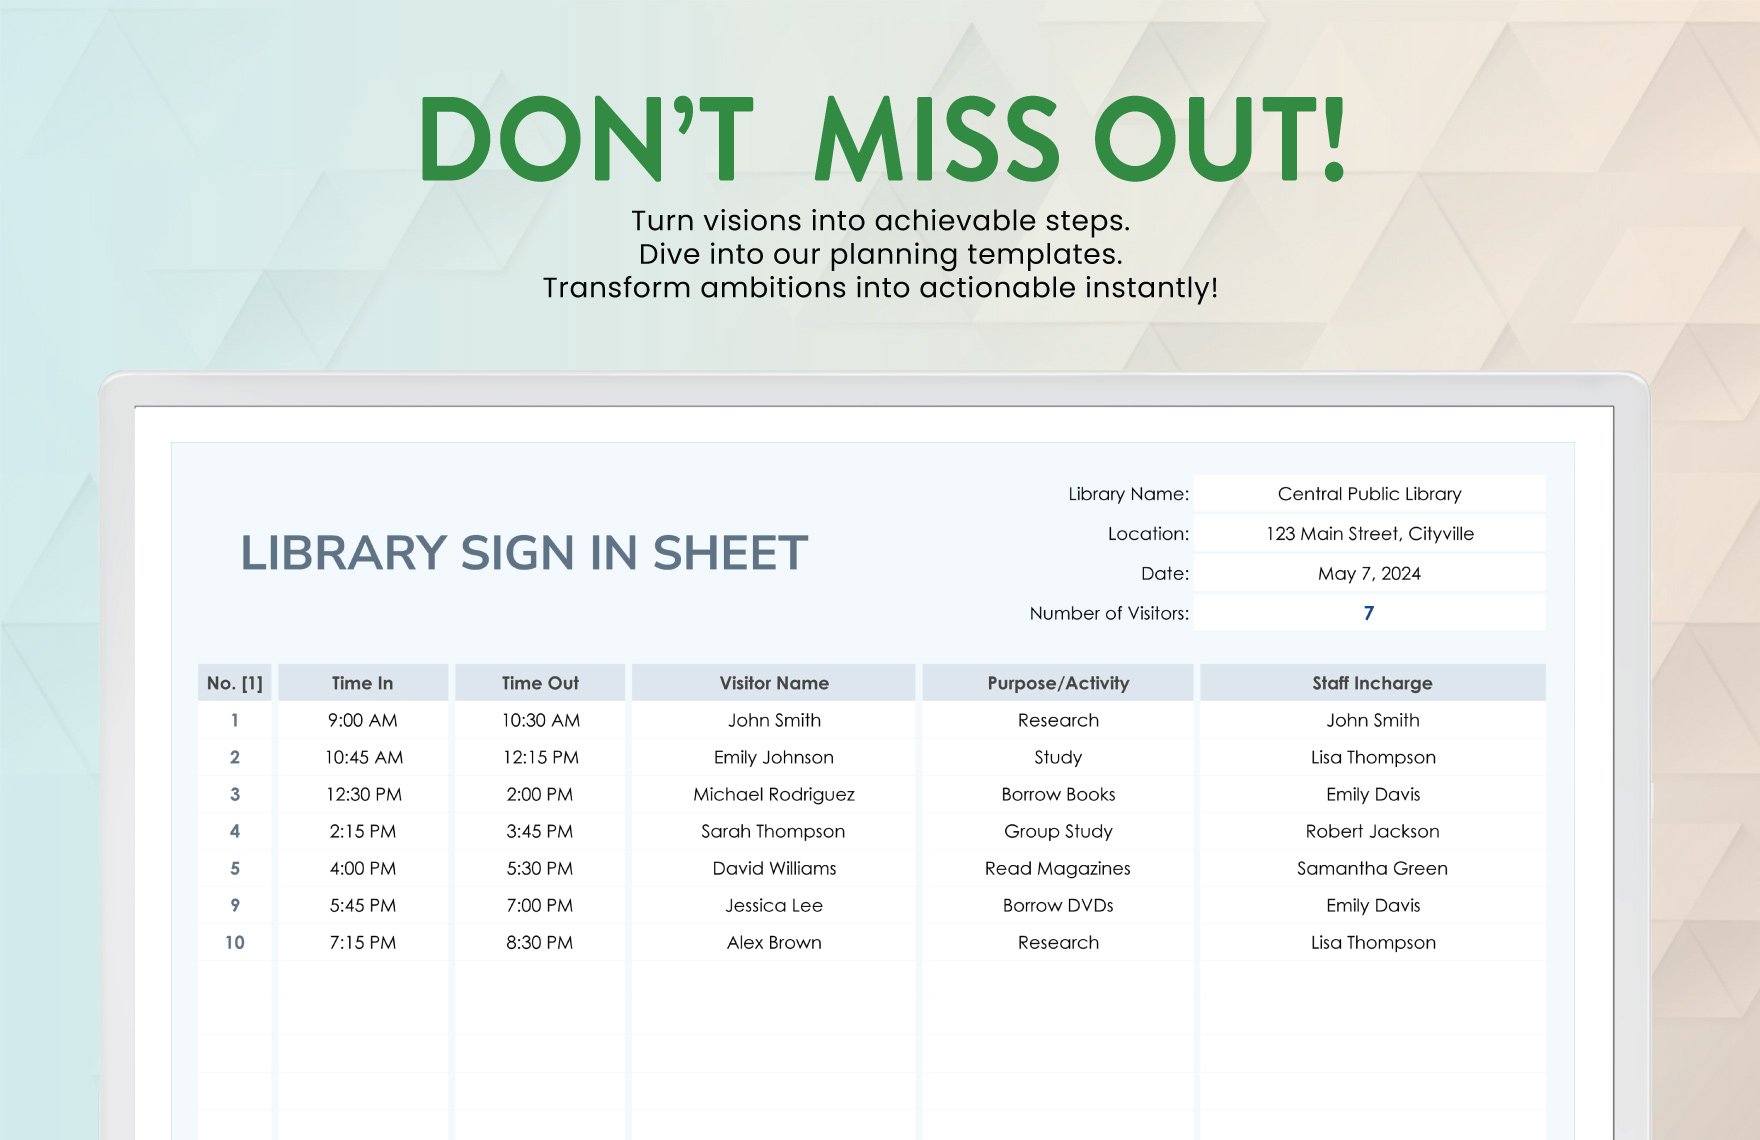 Library Sign in Sheet Template